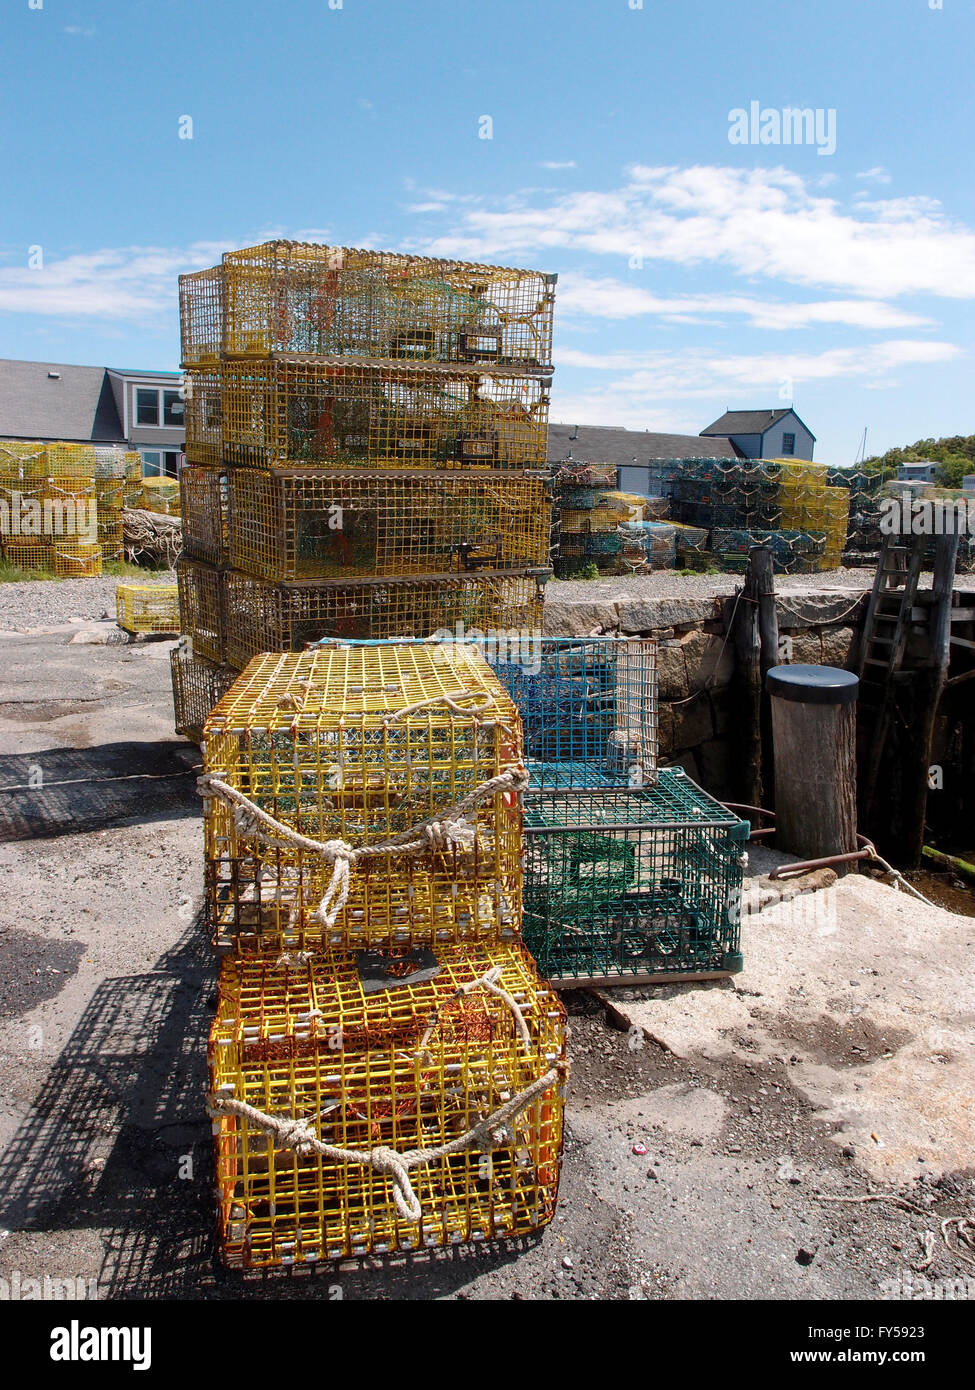 Lobster traps in fishing village of Rockport, Massachusetts Stock Photo